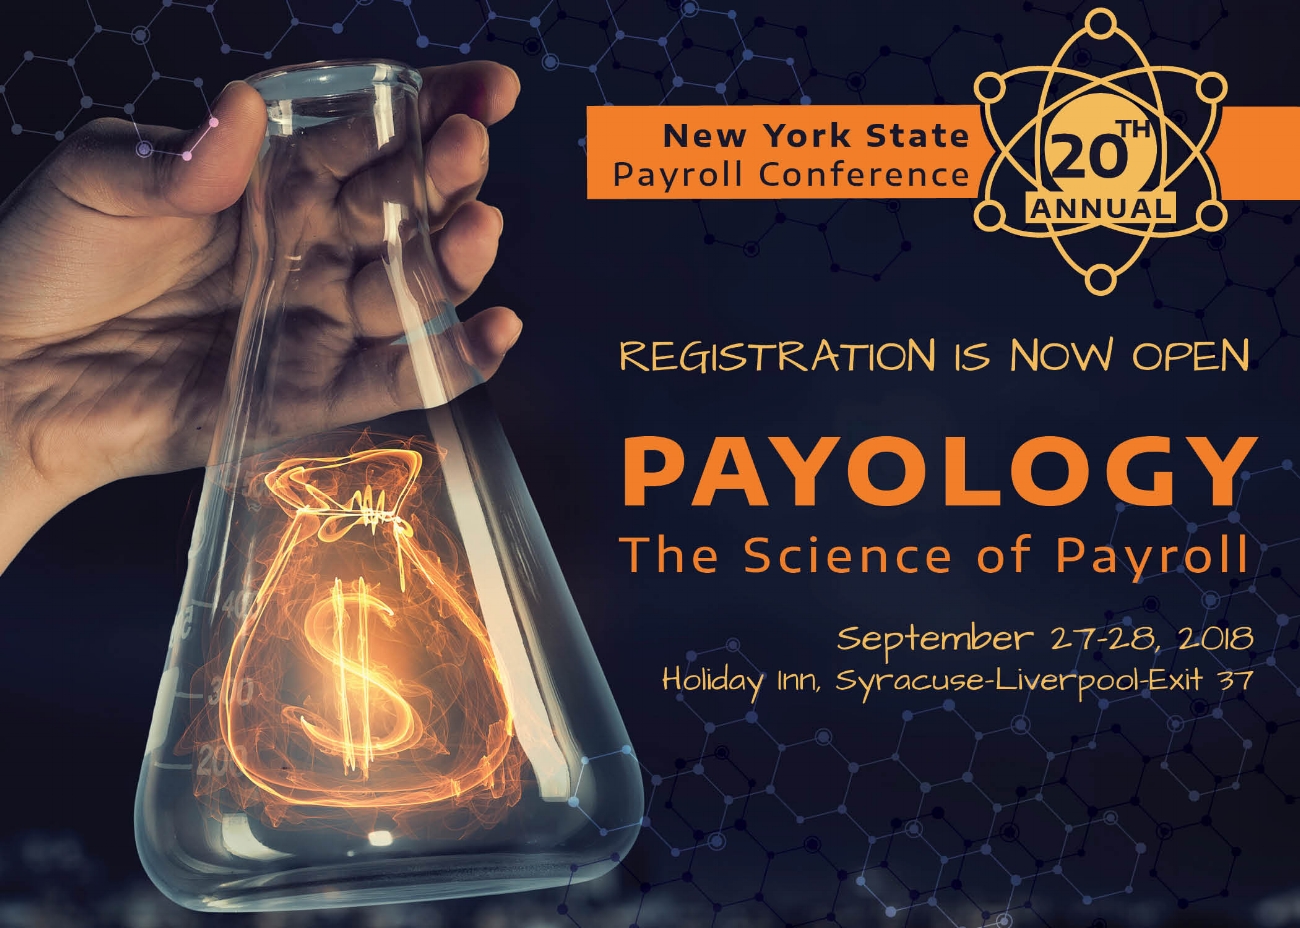 New York Statewide Payroll Conference